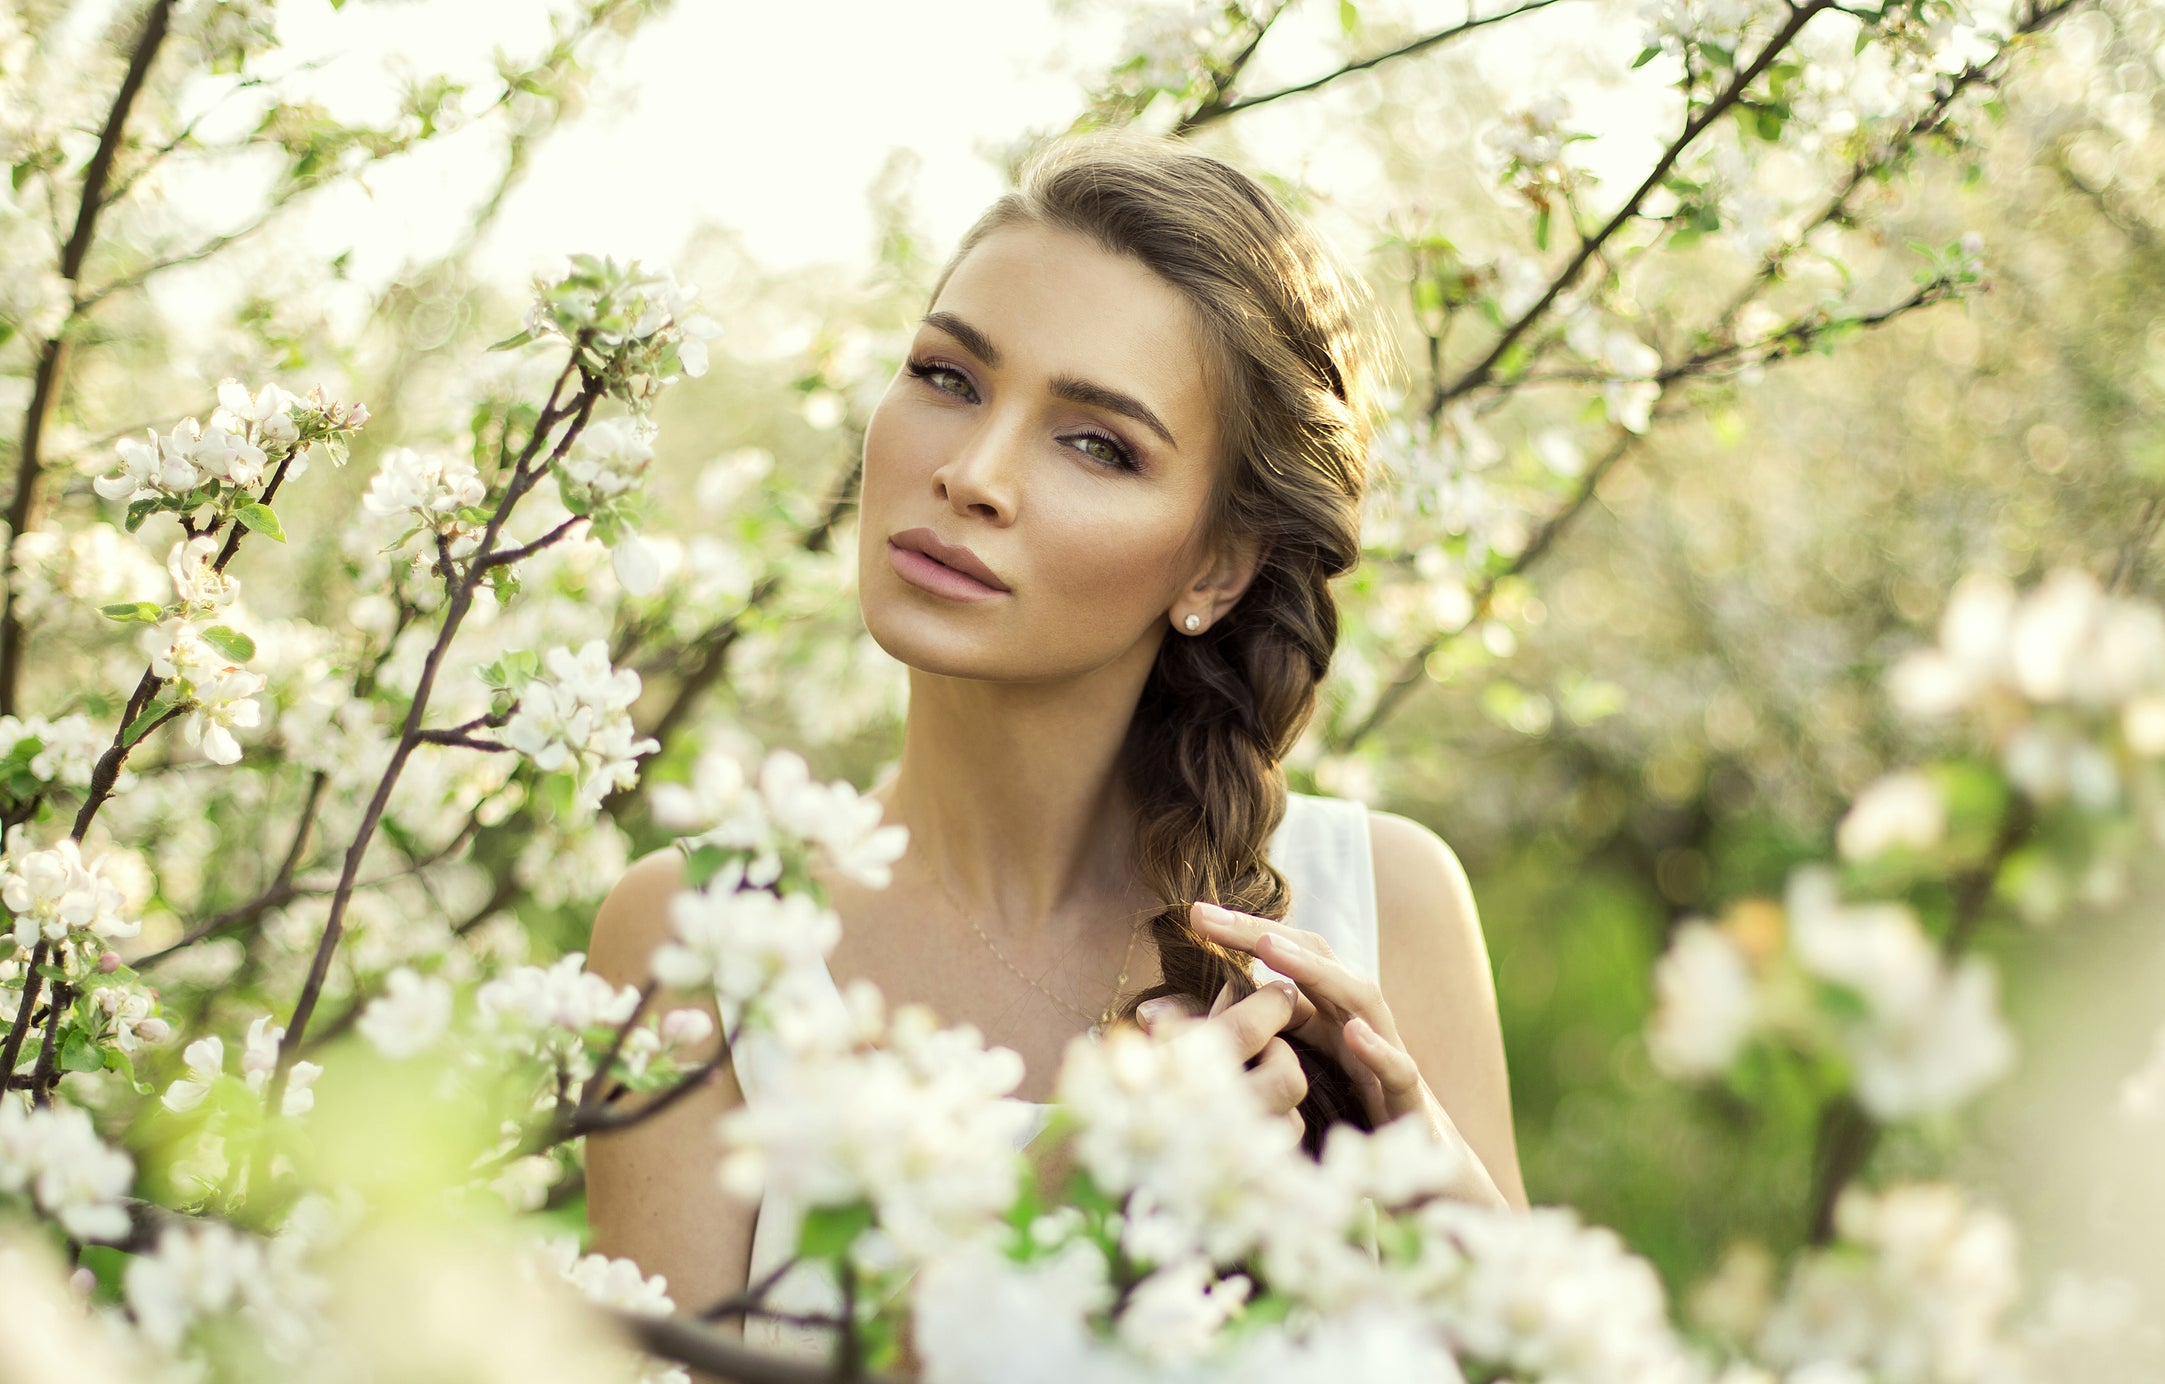 5 skin tips to transition from winter to spring